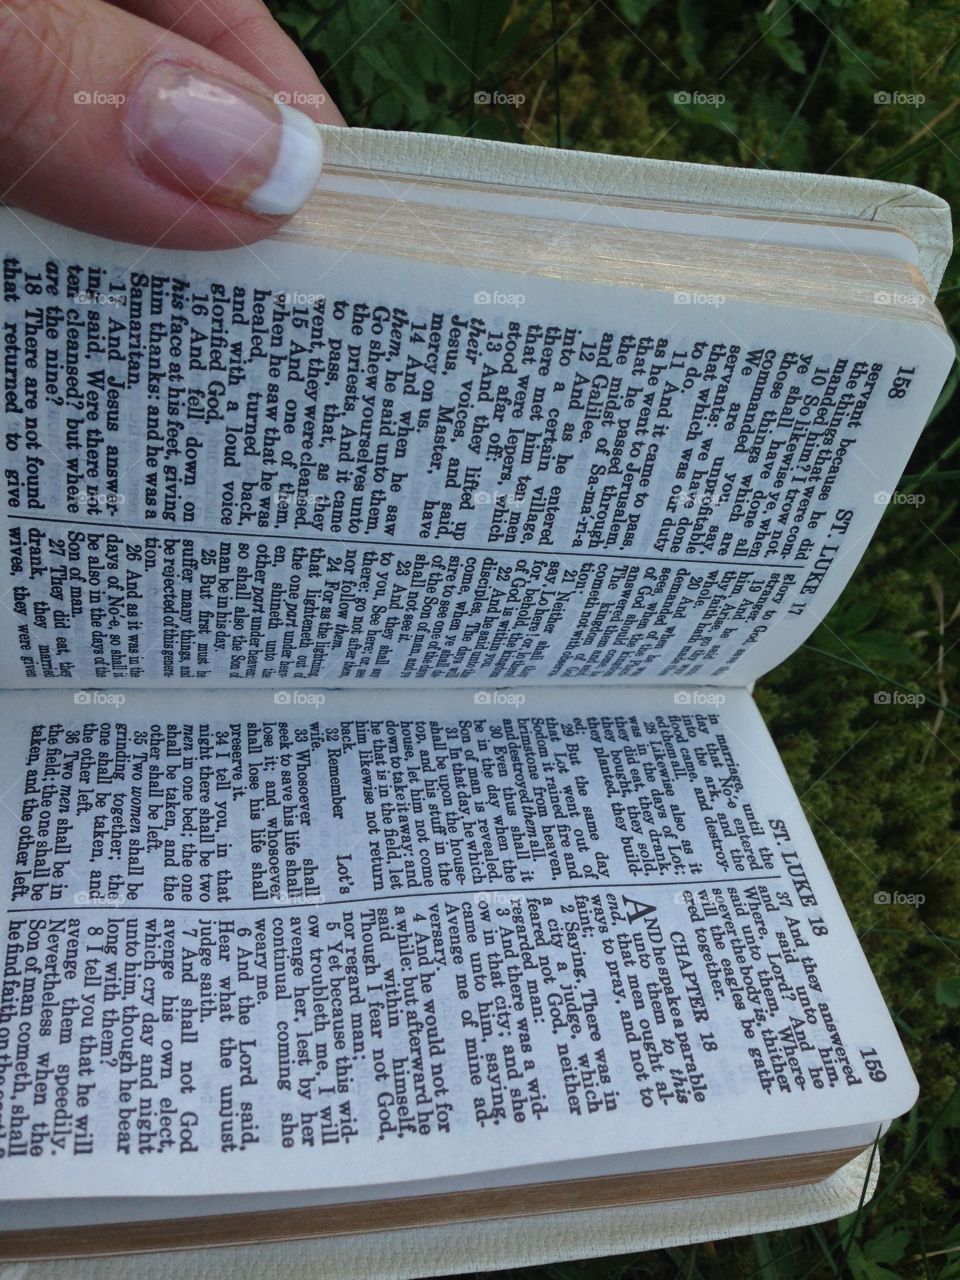 Holy Bible Opened to Luke Chapters 17, 18. Holy Bible Opened to Luke Chapters 17, 18